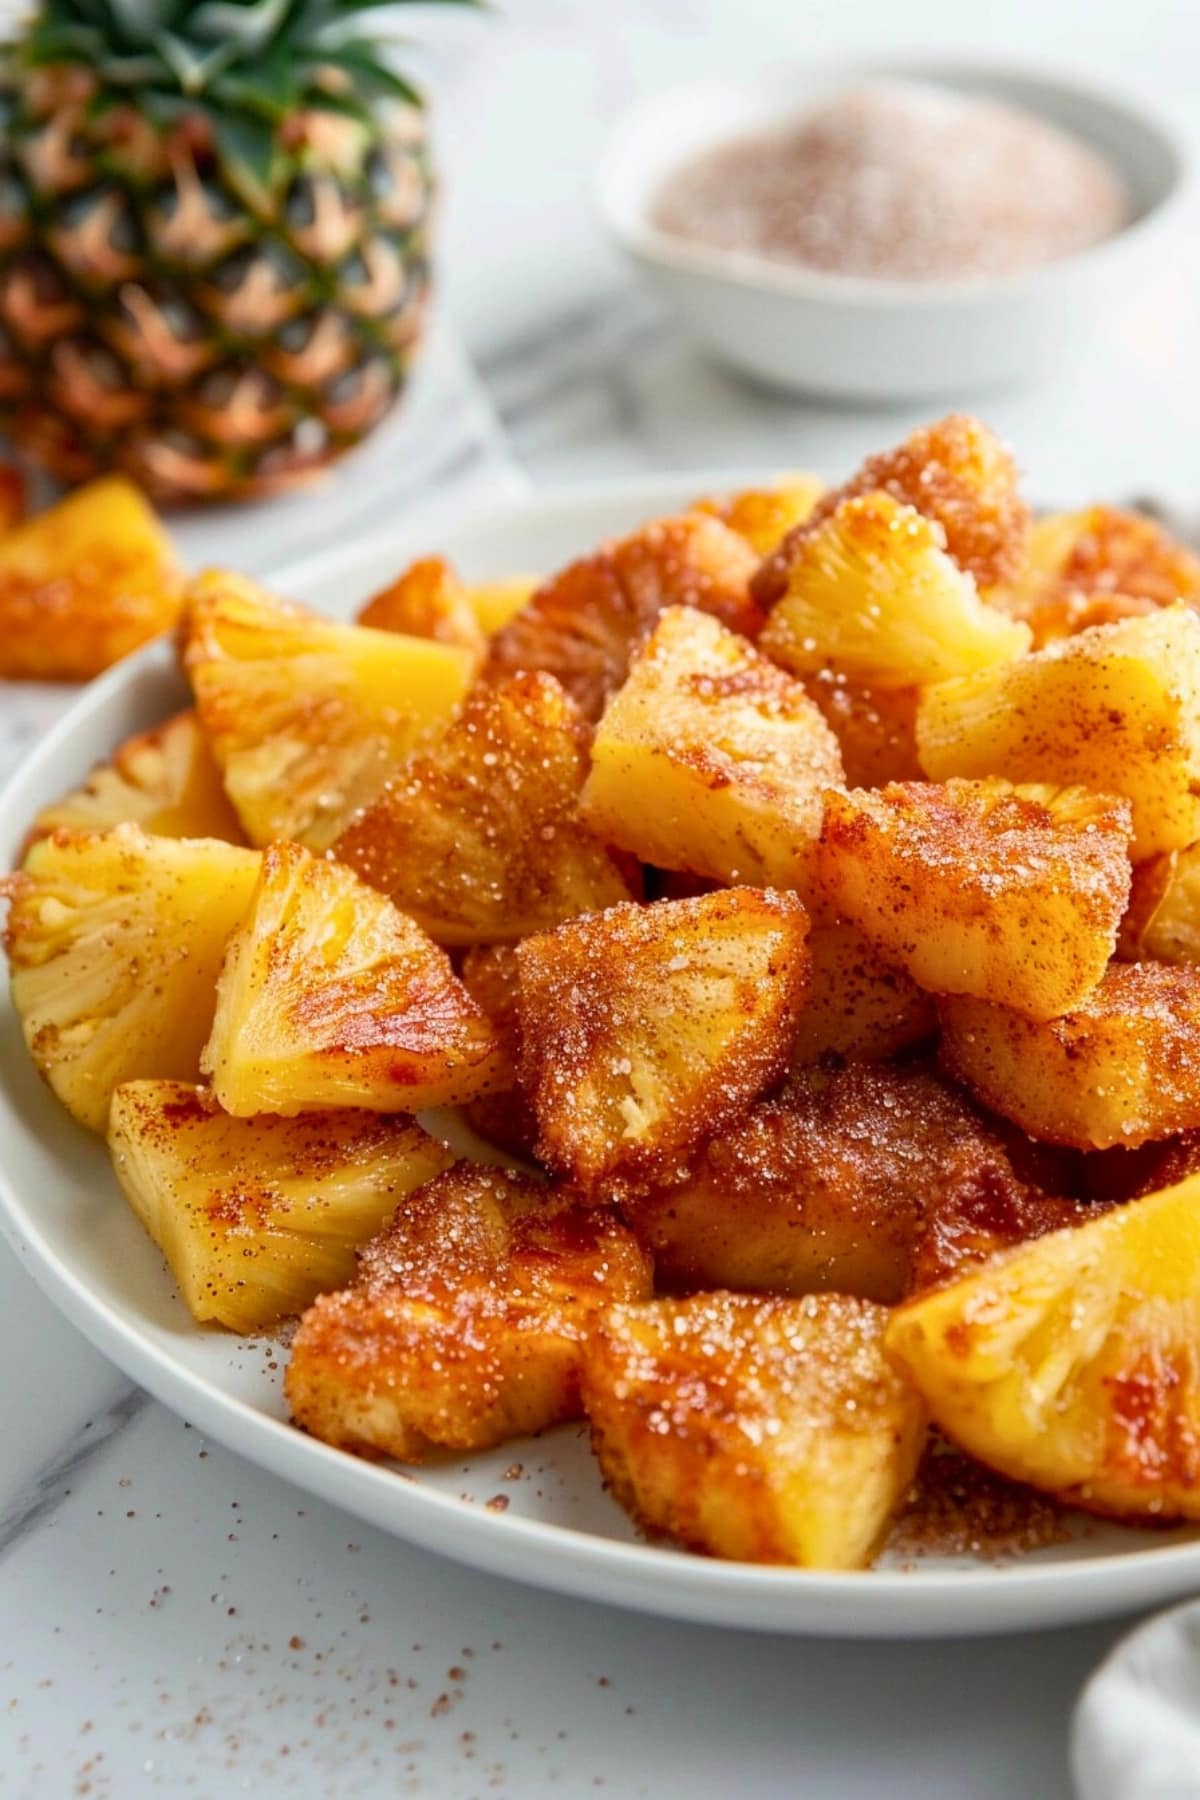 Bite size air fried cinnamon sugar coated pineapple in a white plate.